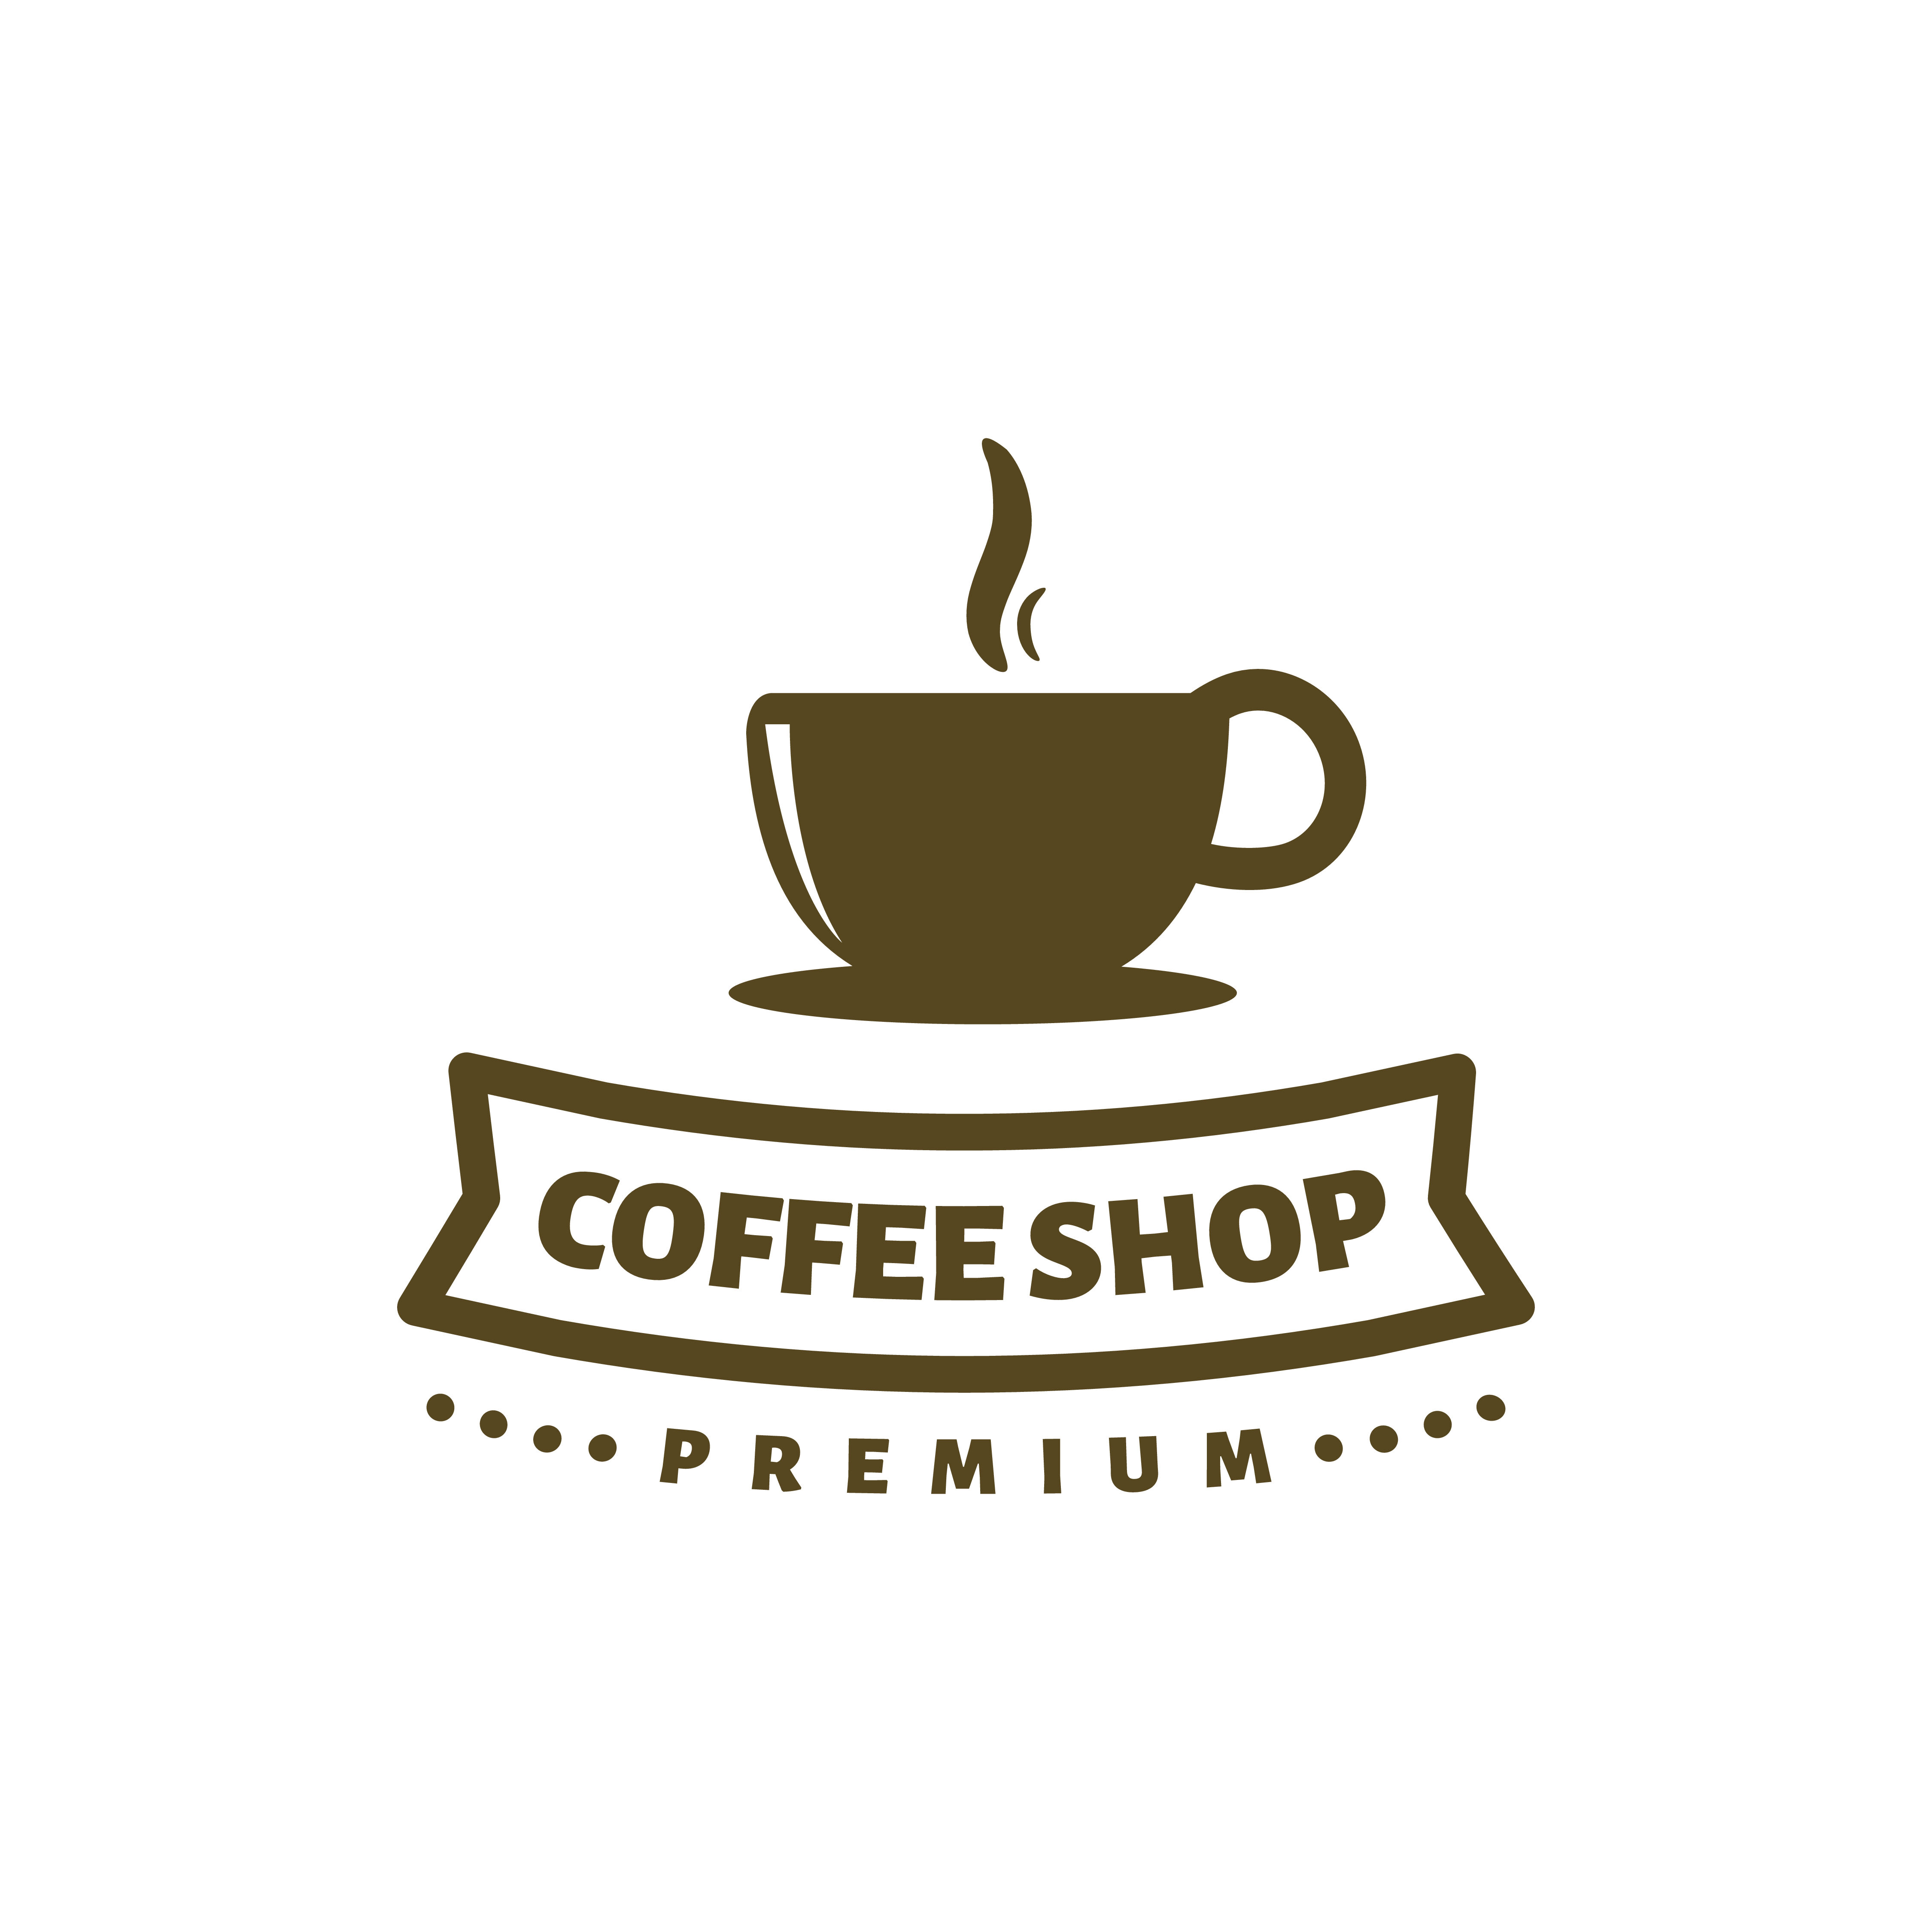 coffee shop logo template vector for premium coffee business By ...